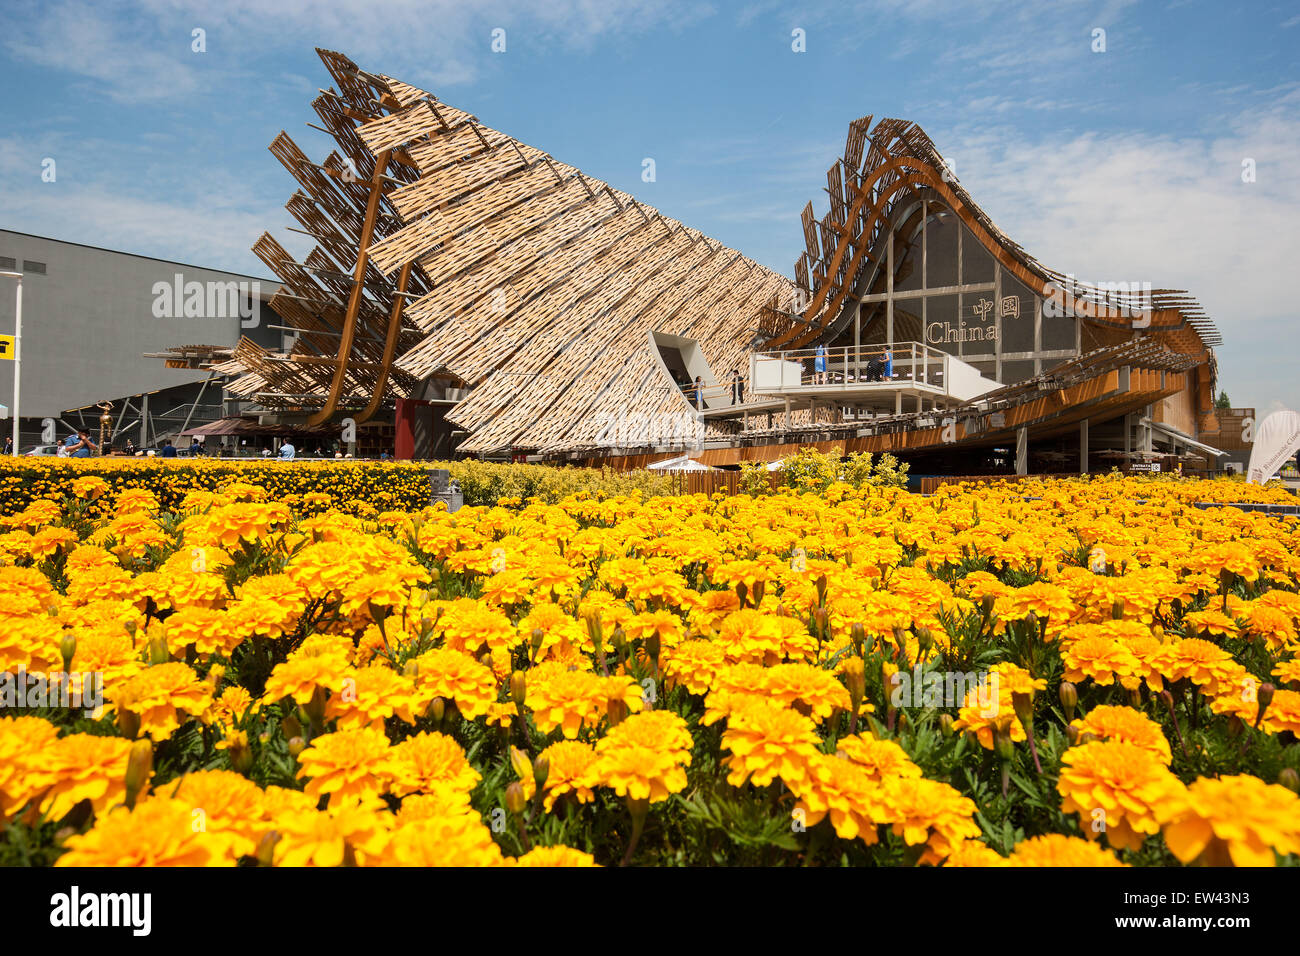 Milan, Expo 2015, food, architecture, Cina pavilion, structure Stock Photo